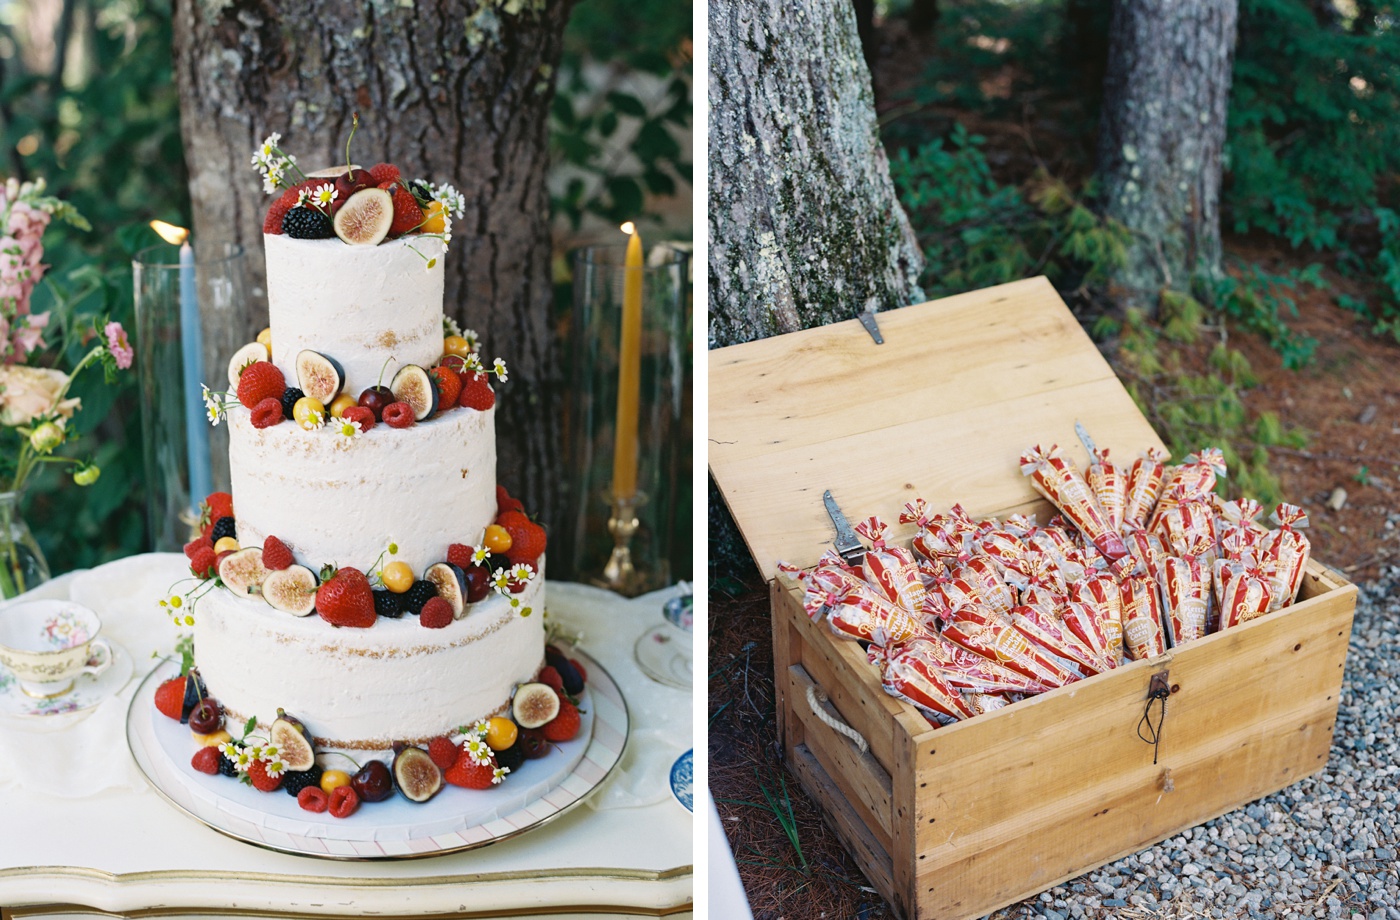 Naked wedding cake covered in summer fruits by For Goodness Cakes